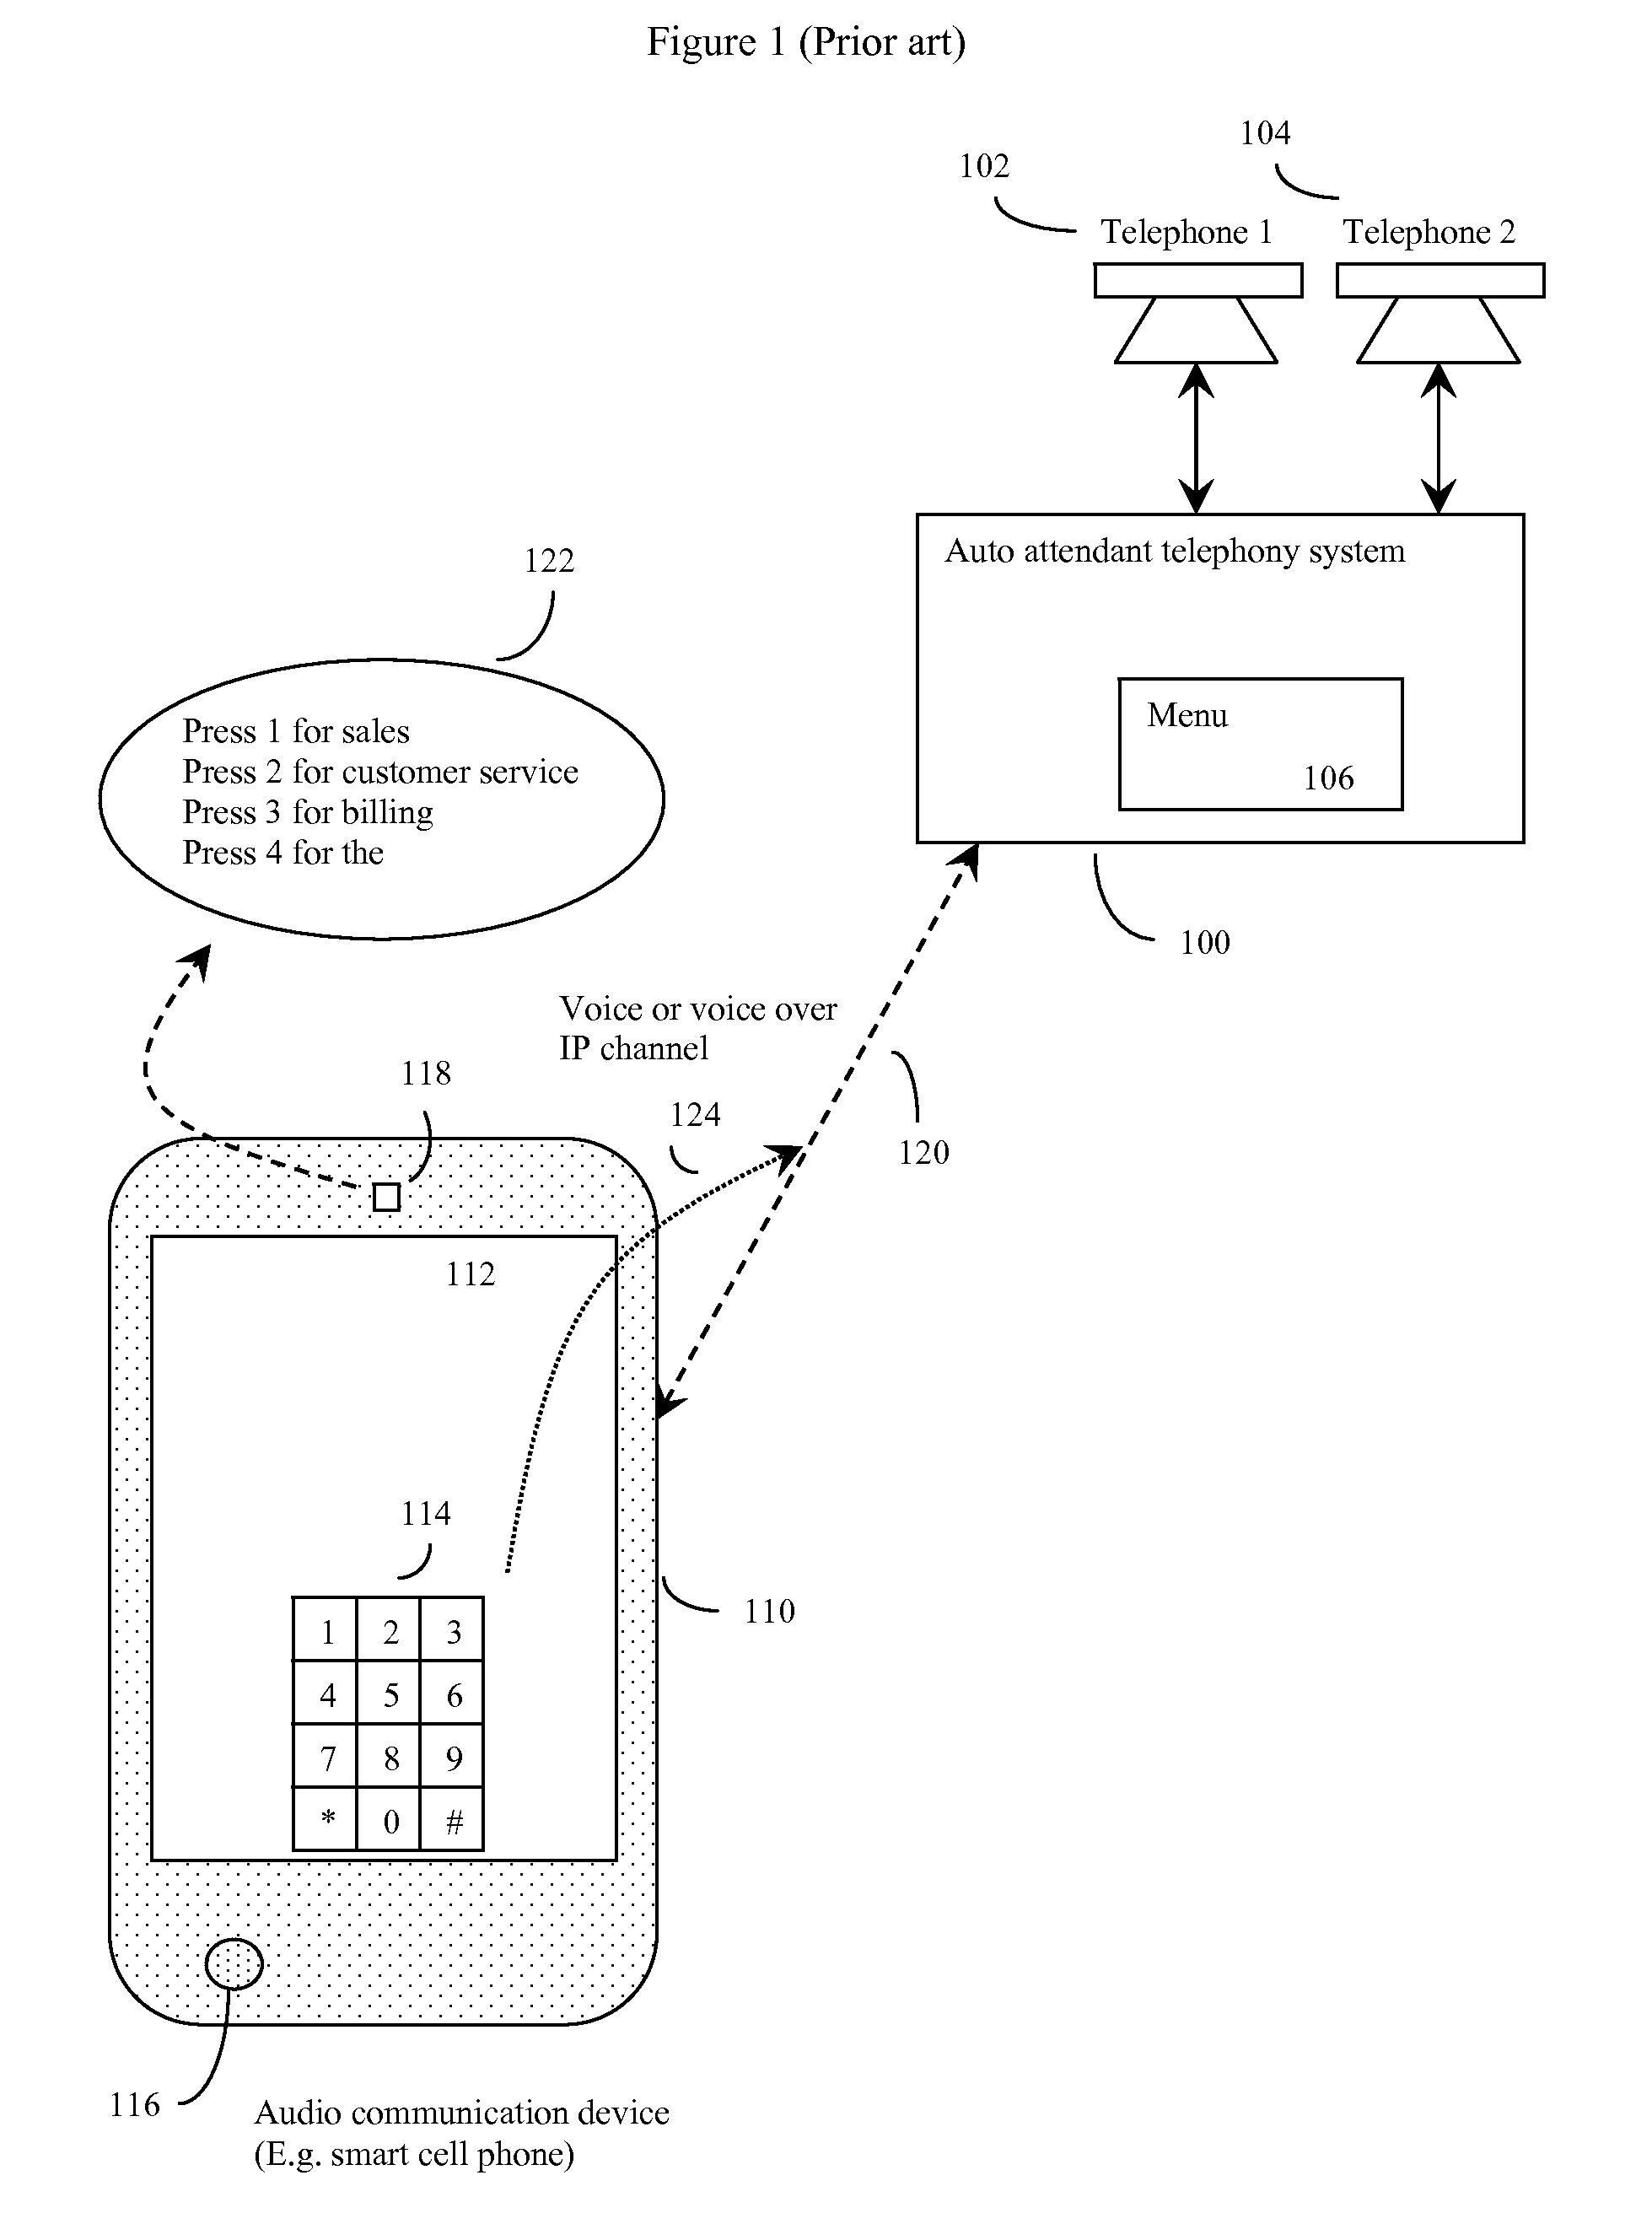 Method and apparatus for data channel augmented auto attended voice response systems